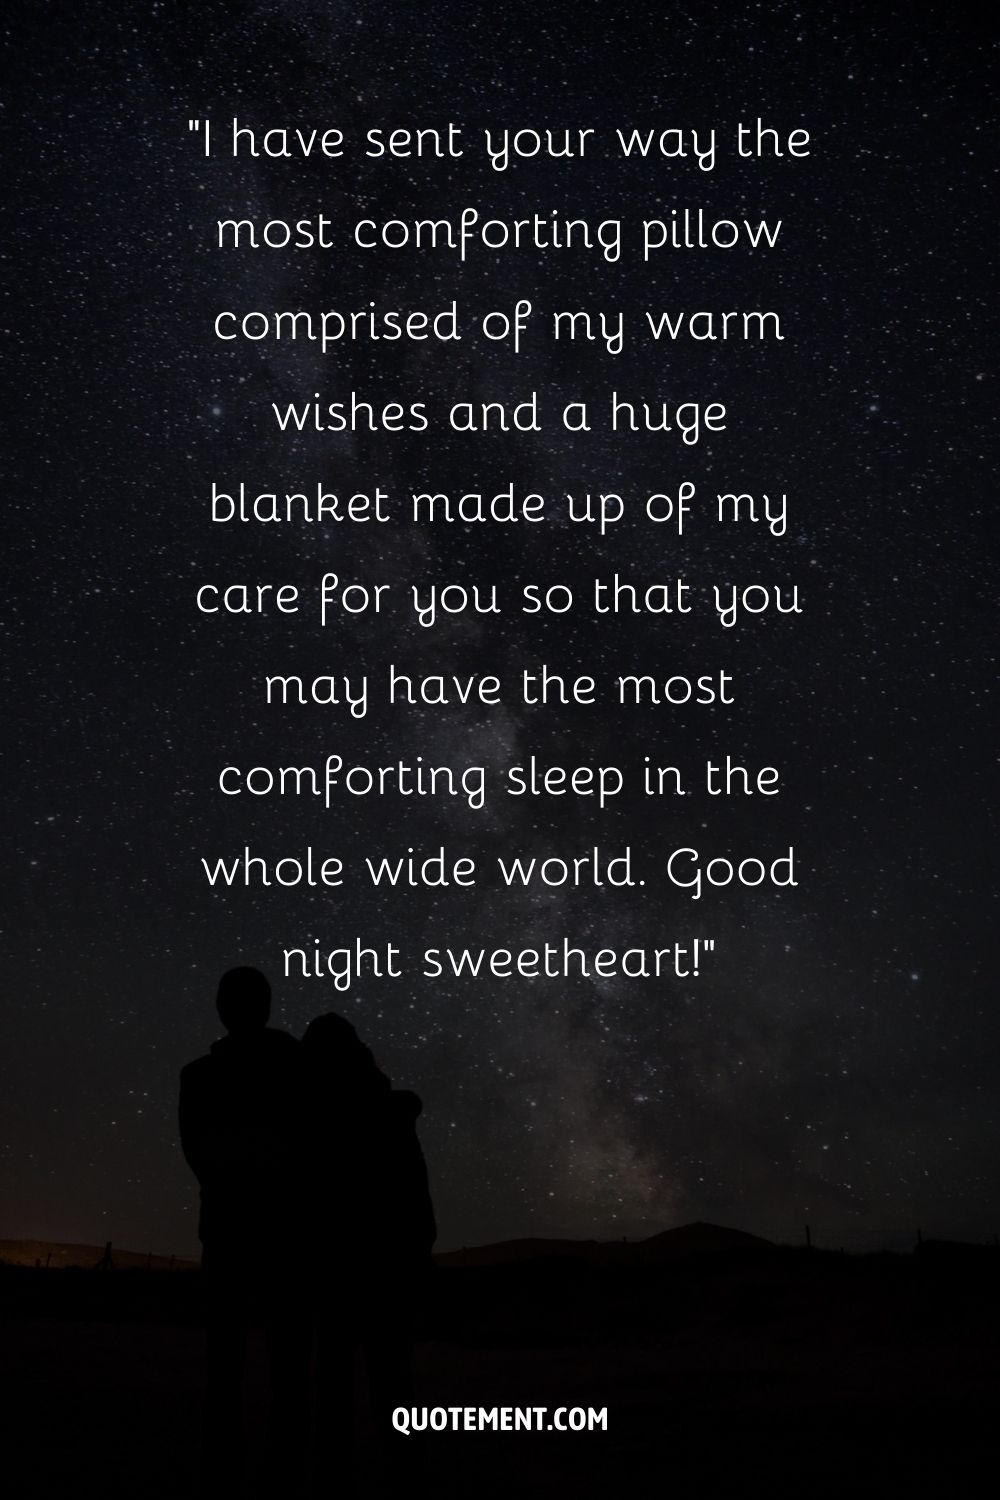 A romantic silhouette of a couple against a backdrop of a star-filled sky